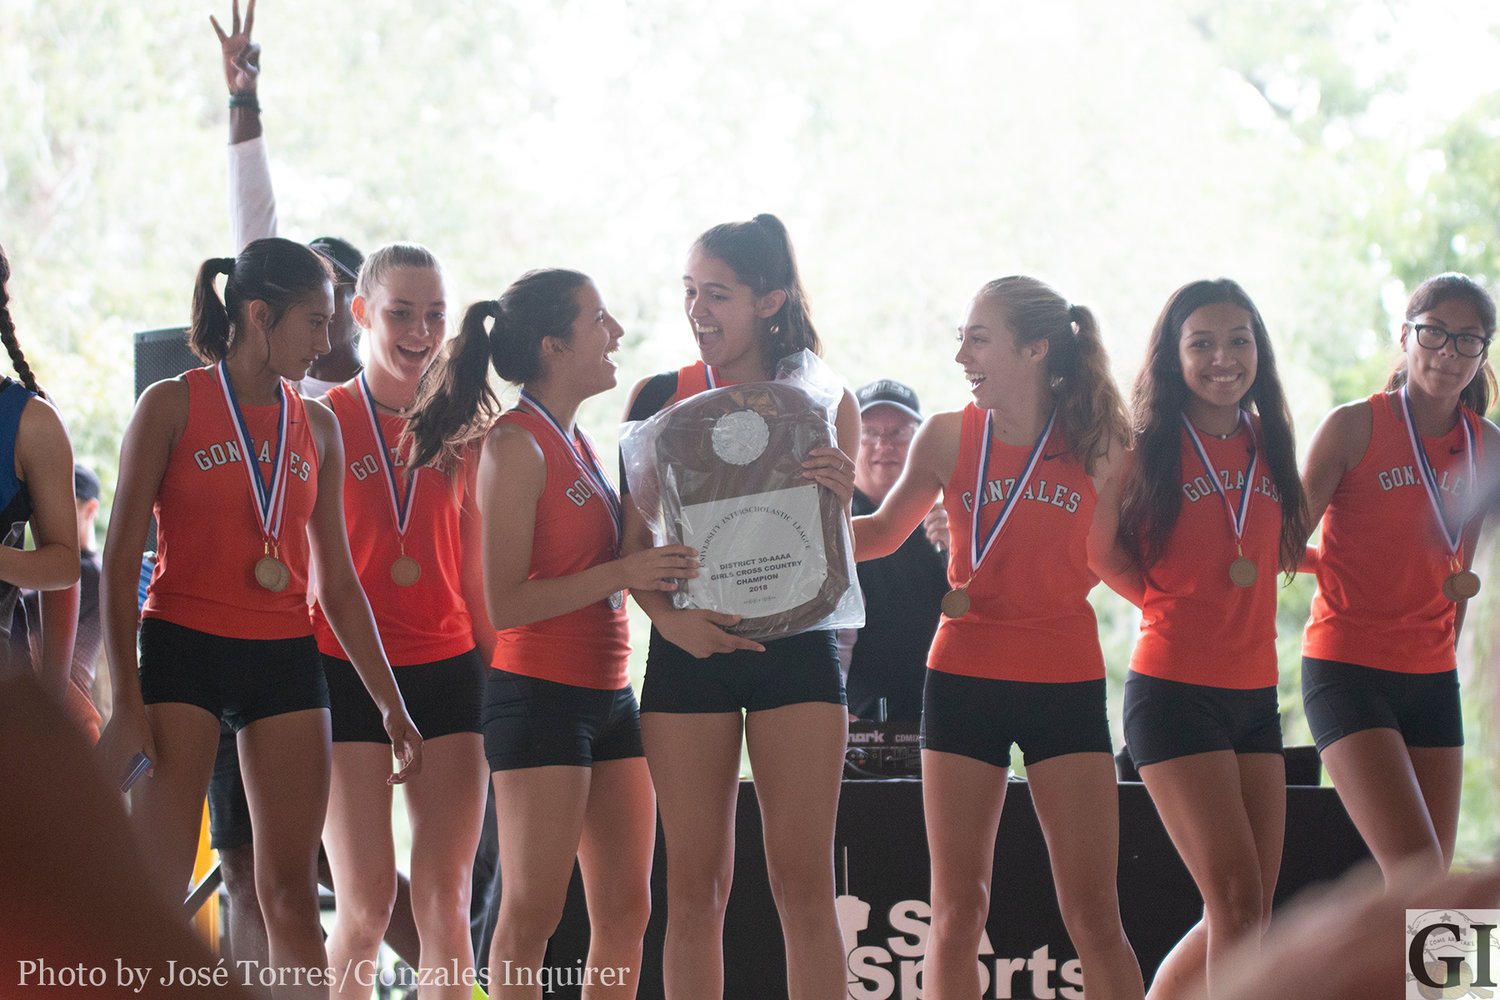 The Lady Apaches cross-country team of Veronica Moreno, Krisanta Esquivel, Kaylin Ramirez, Krystalynn Buesing, Maura Garcia, Stephanie Reyna and Shelby Davis finished first, capturing their third district title in a row, winning the 30-4A meet in Seguin on Tuesday.